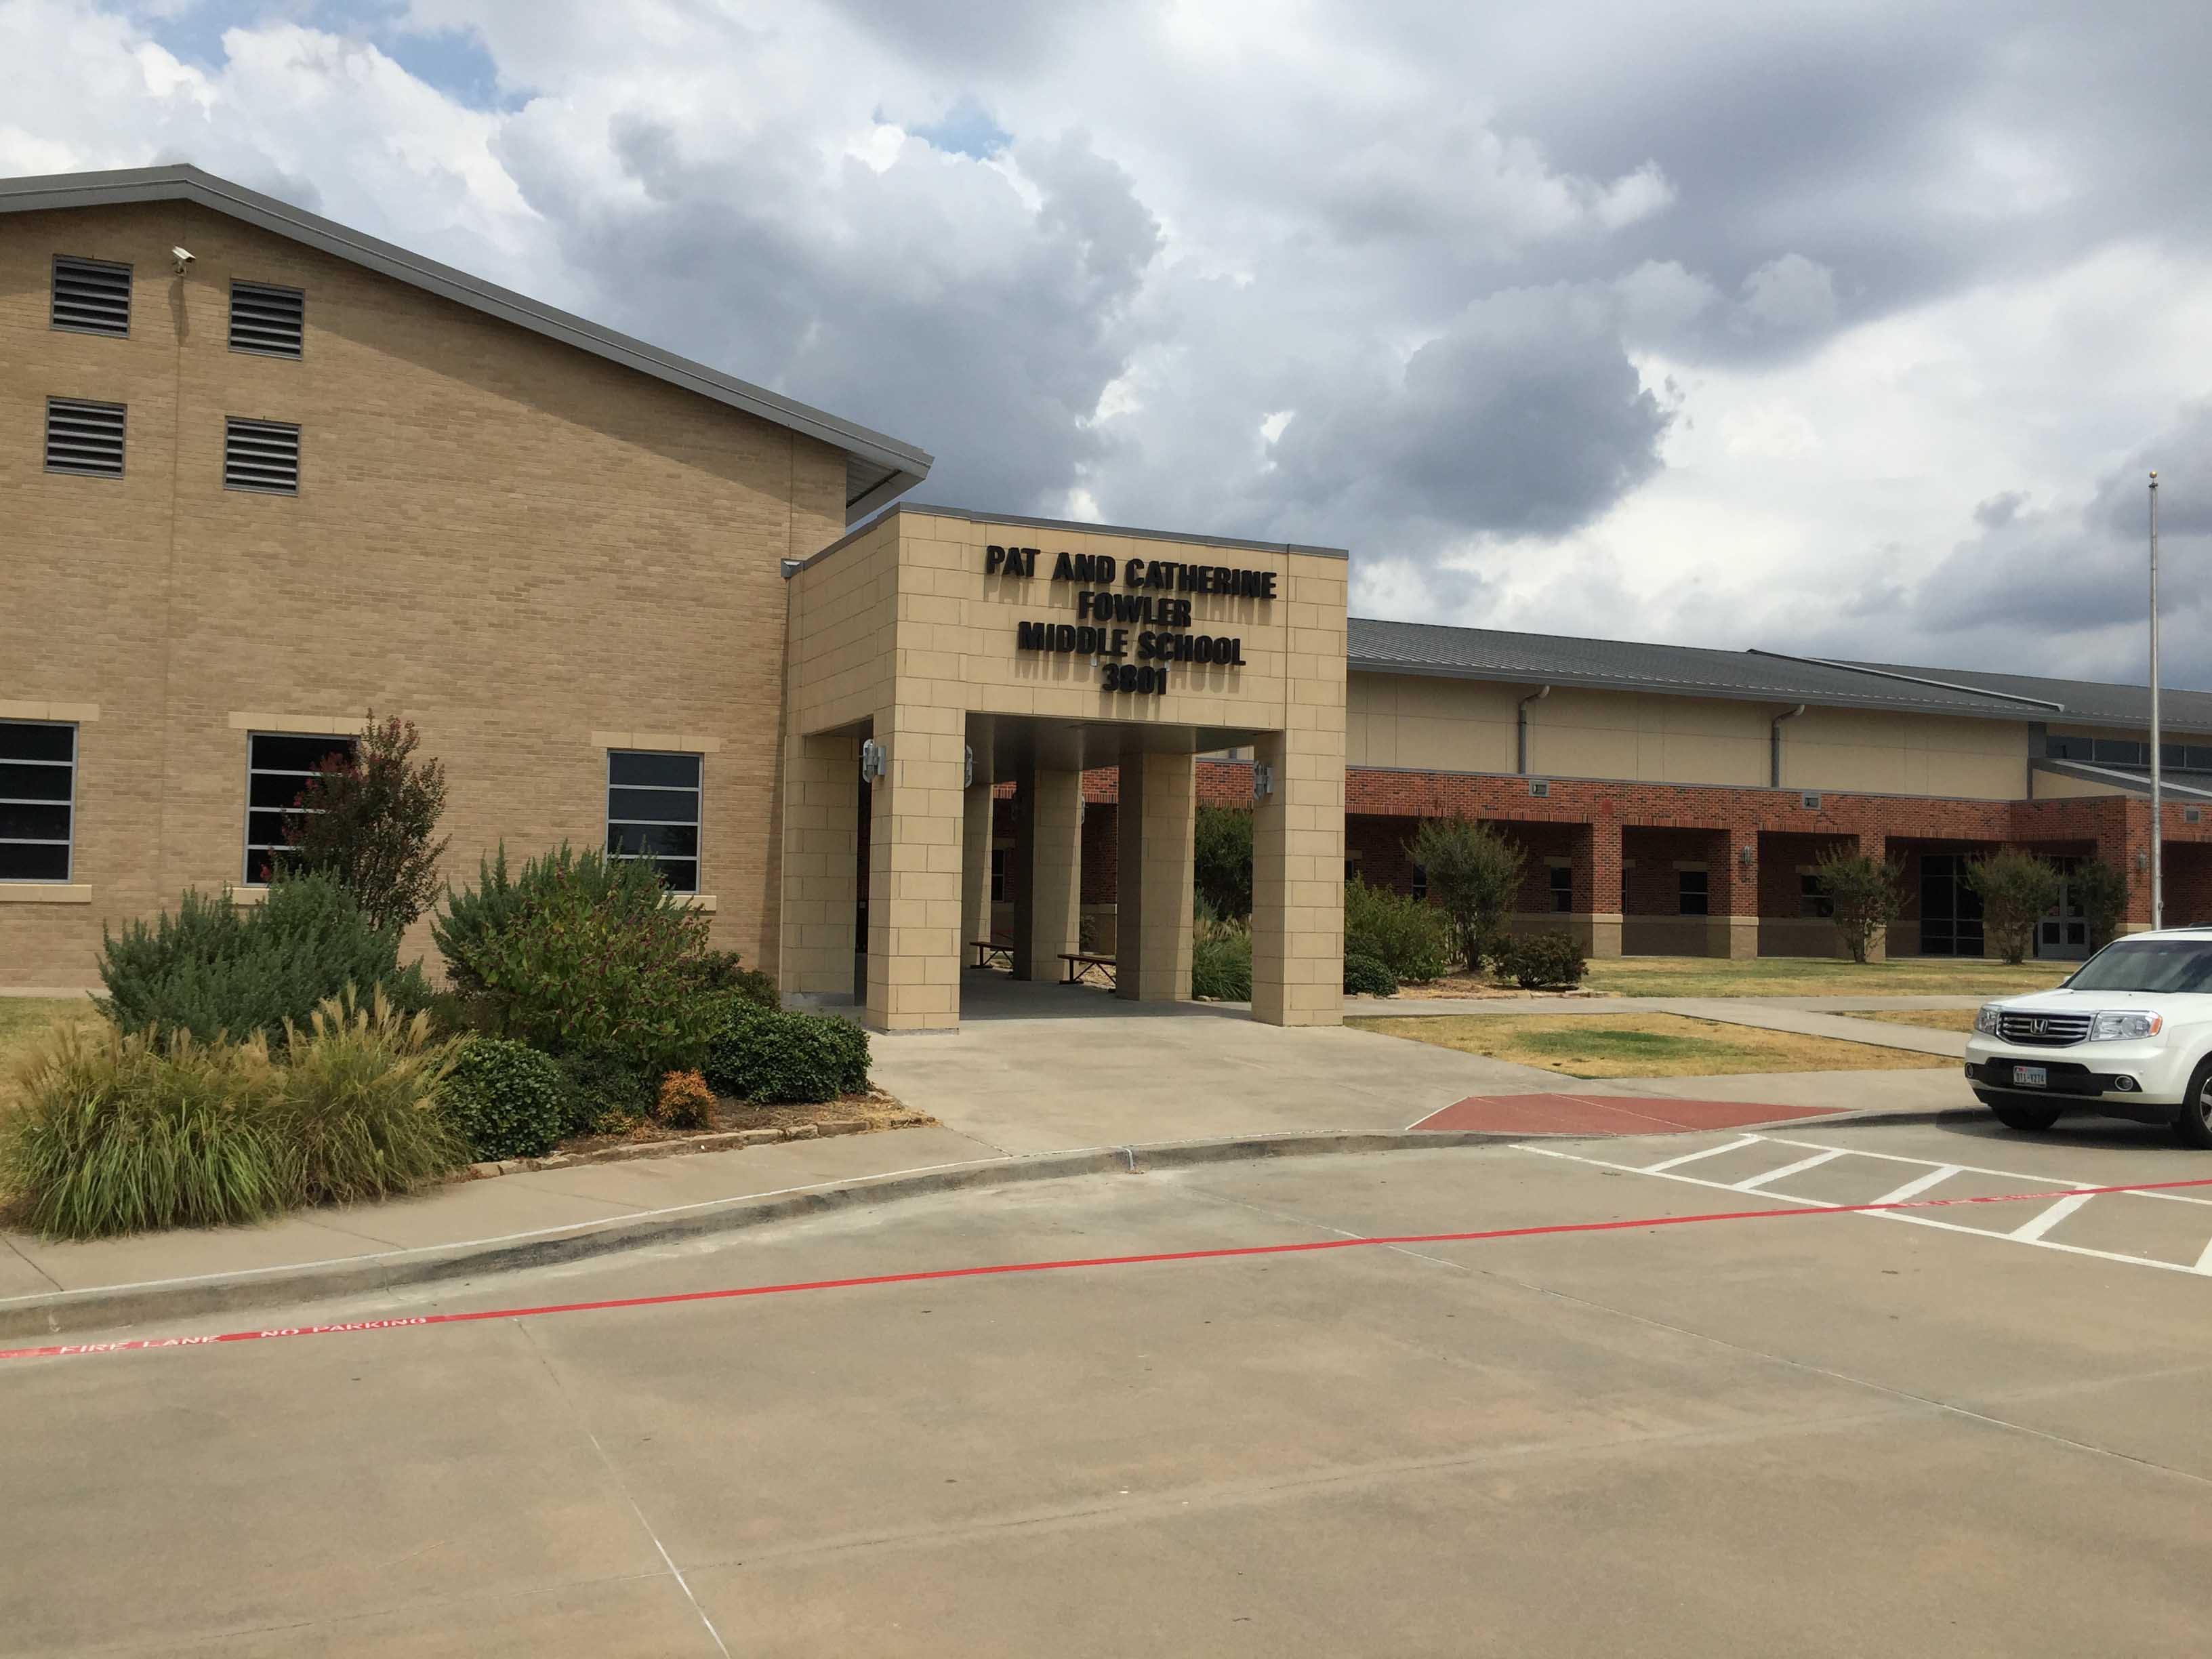 With the high school campus not yet finished, the Frisco ISD decided to house the high school on the campus of Fowler Middle School for its first year.